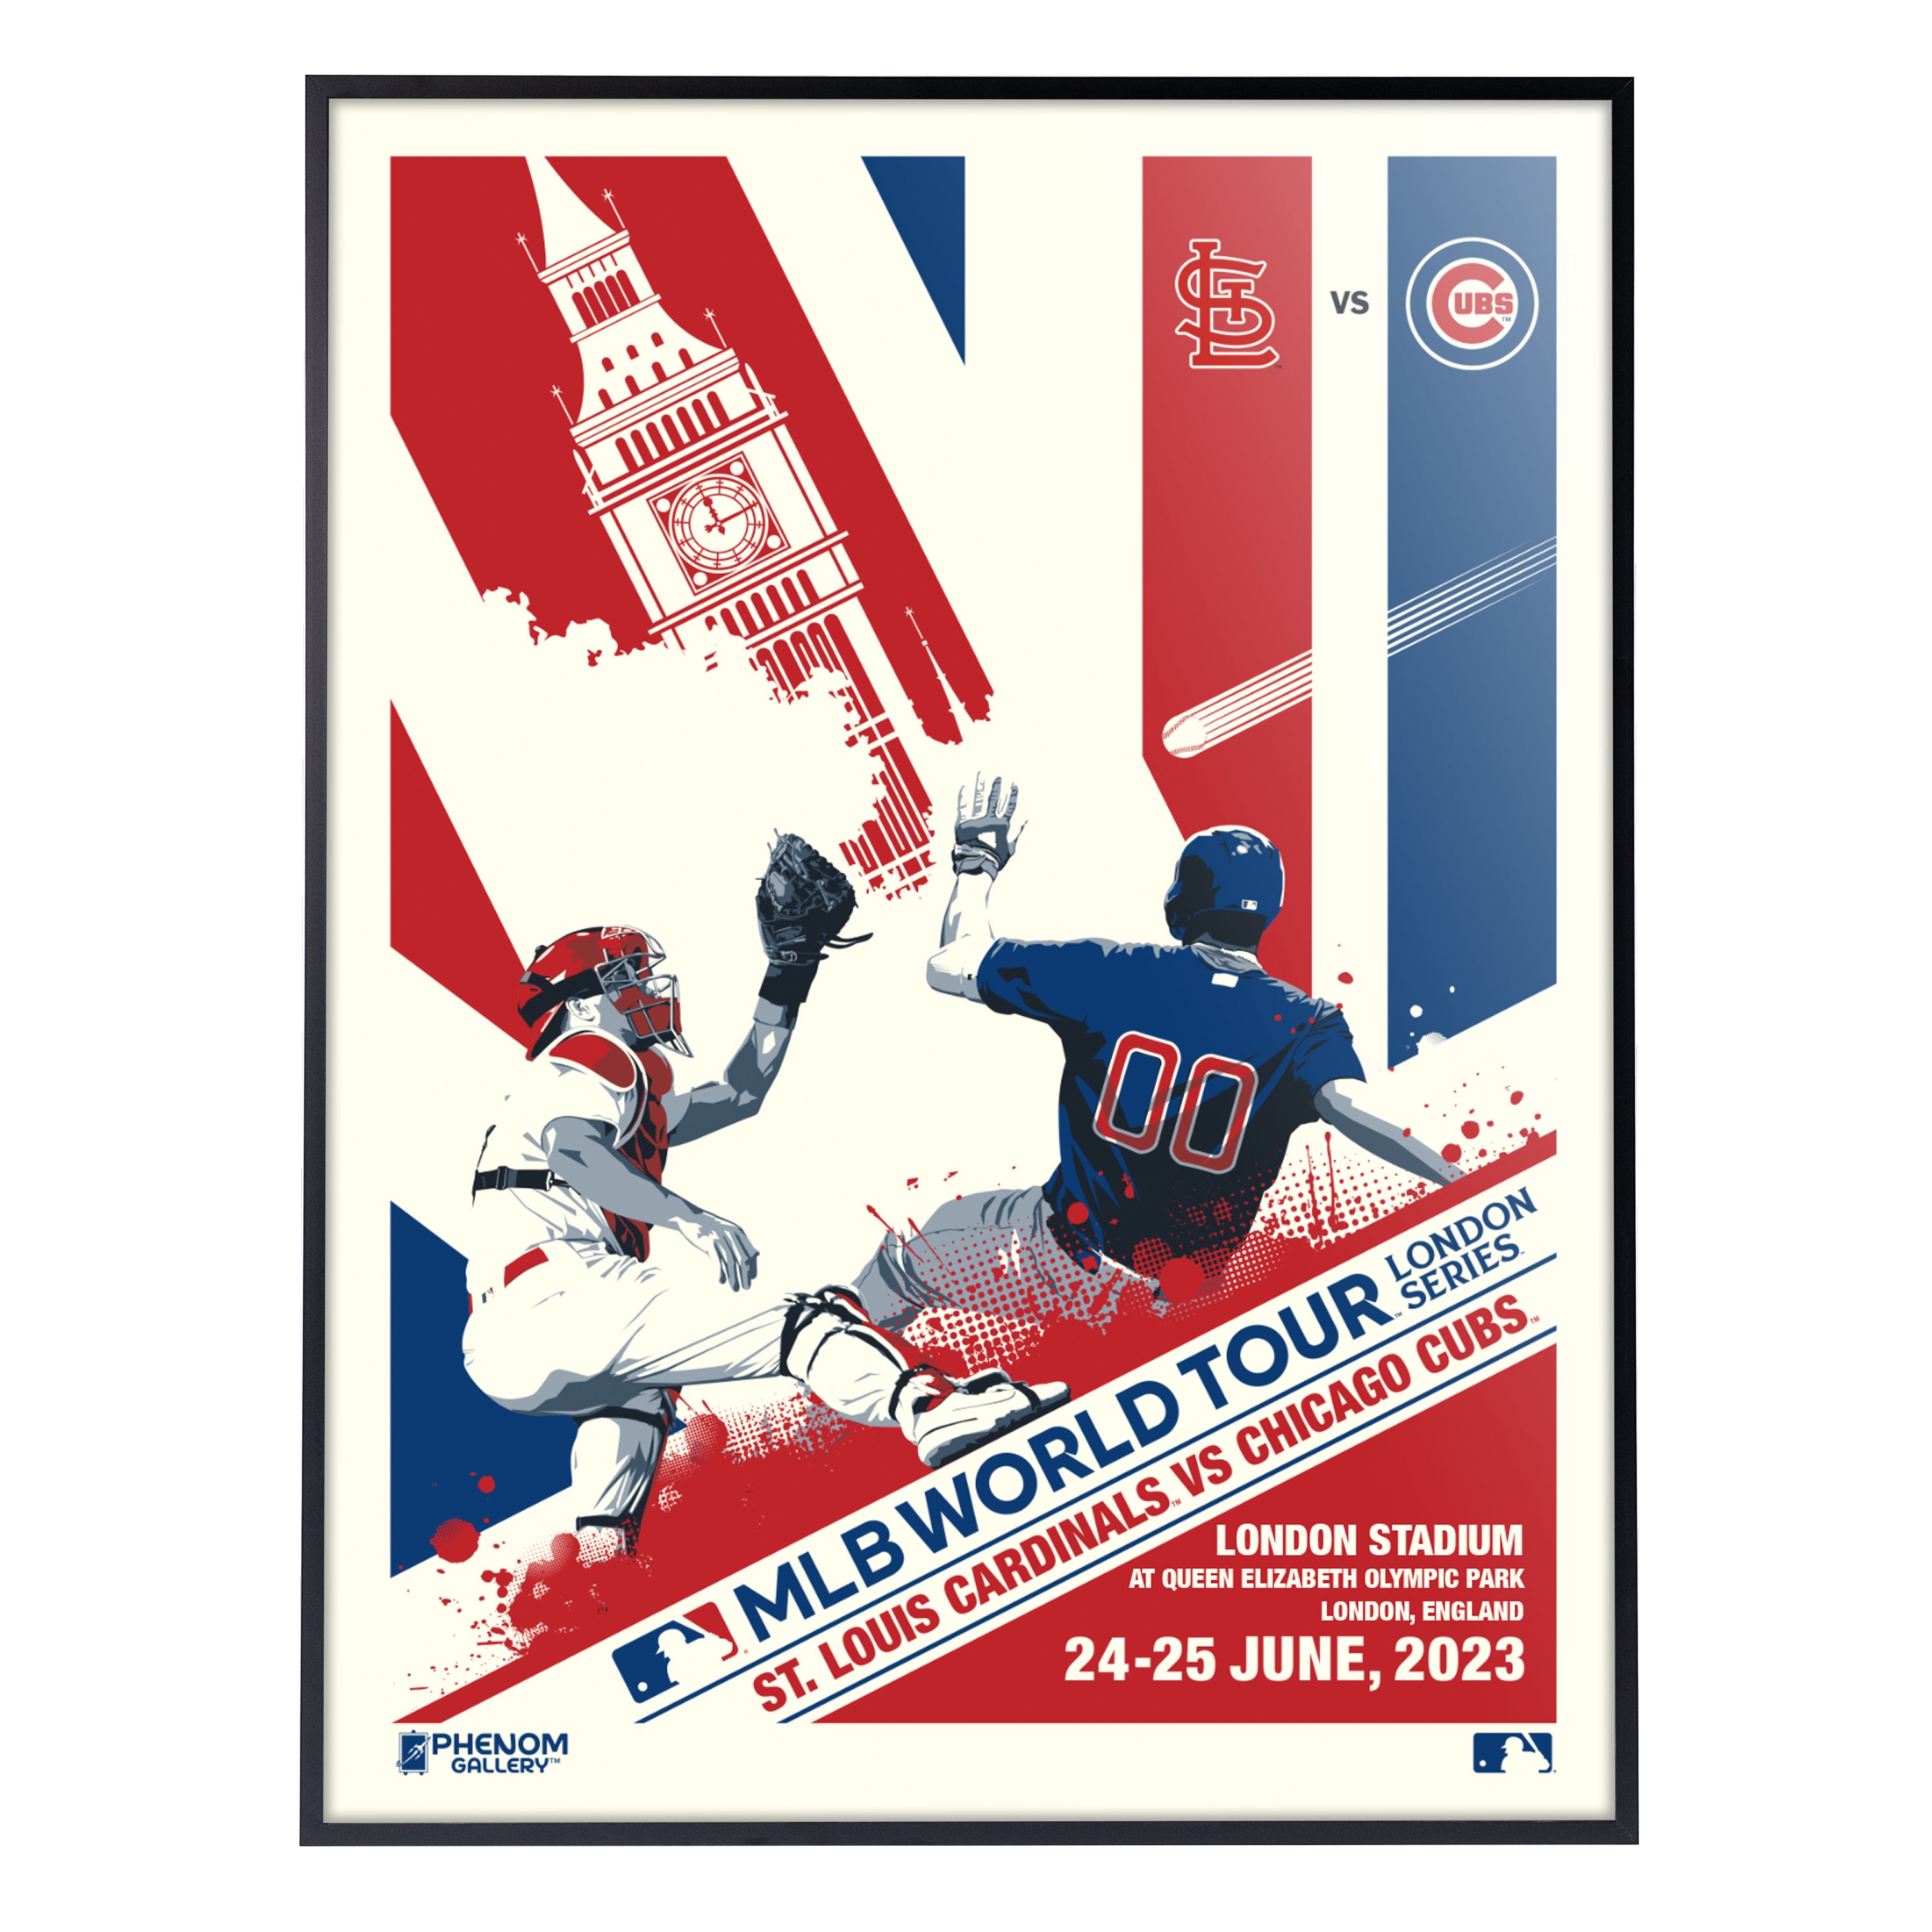 MLB London Series 2023: how to get MLB World Tour tickets today